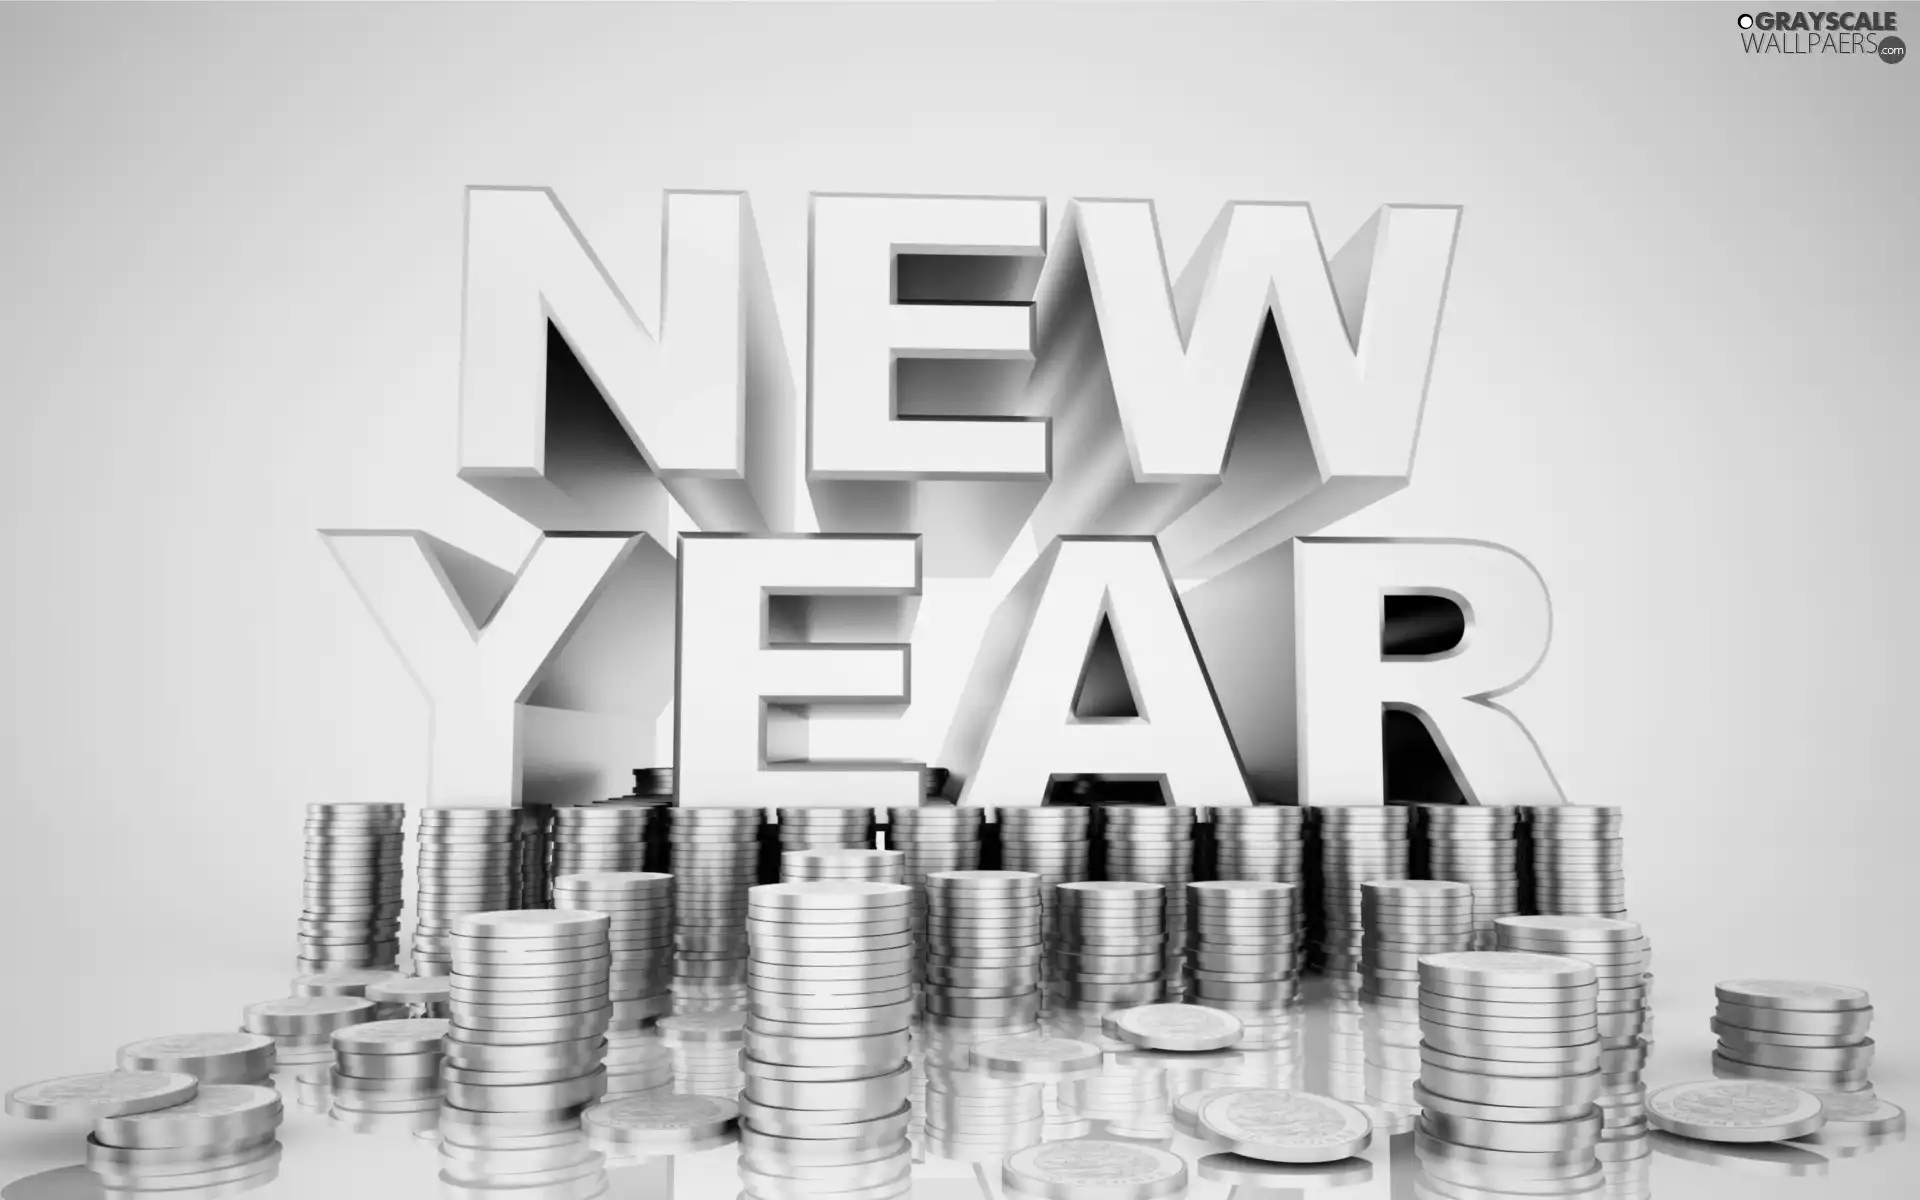 New, text, coins, year